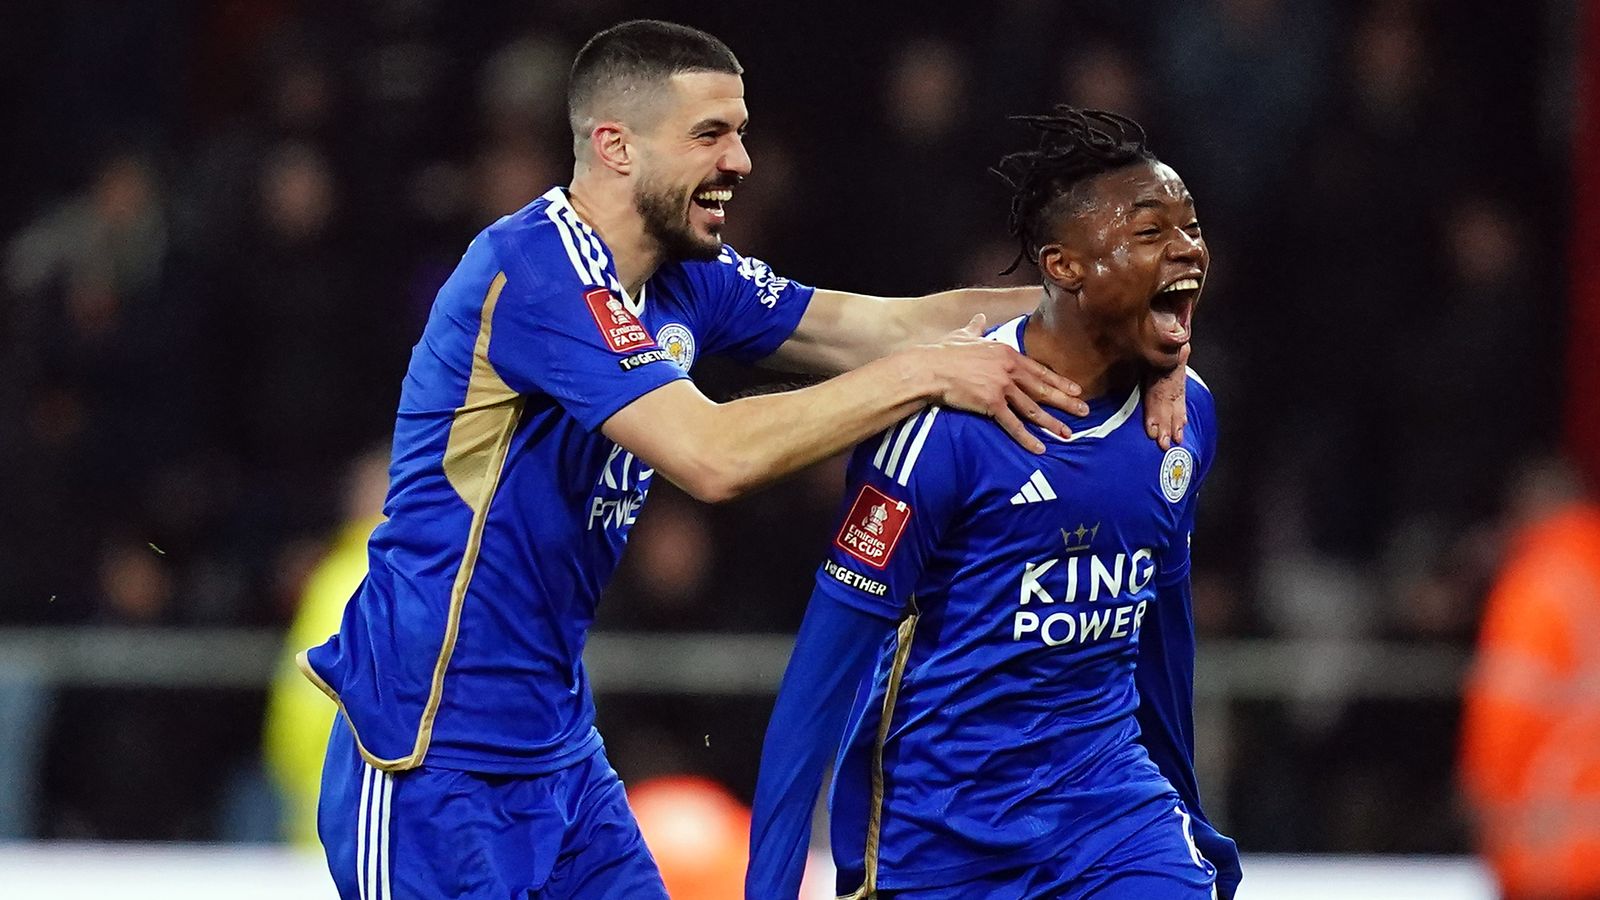 Abdul Fatawu hits extra-time stunner to send Leicester City into FA Cup quarter-finals